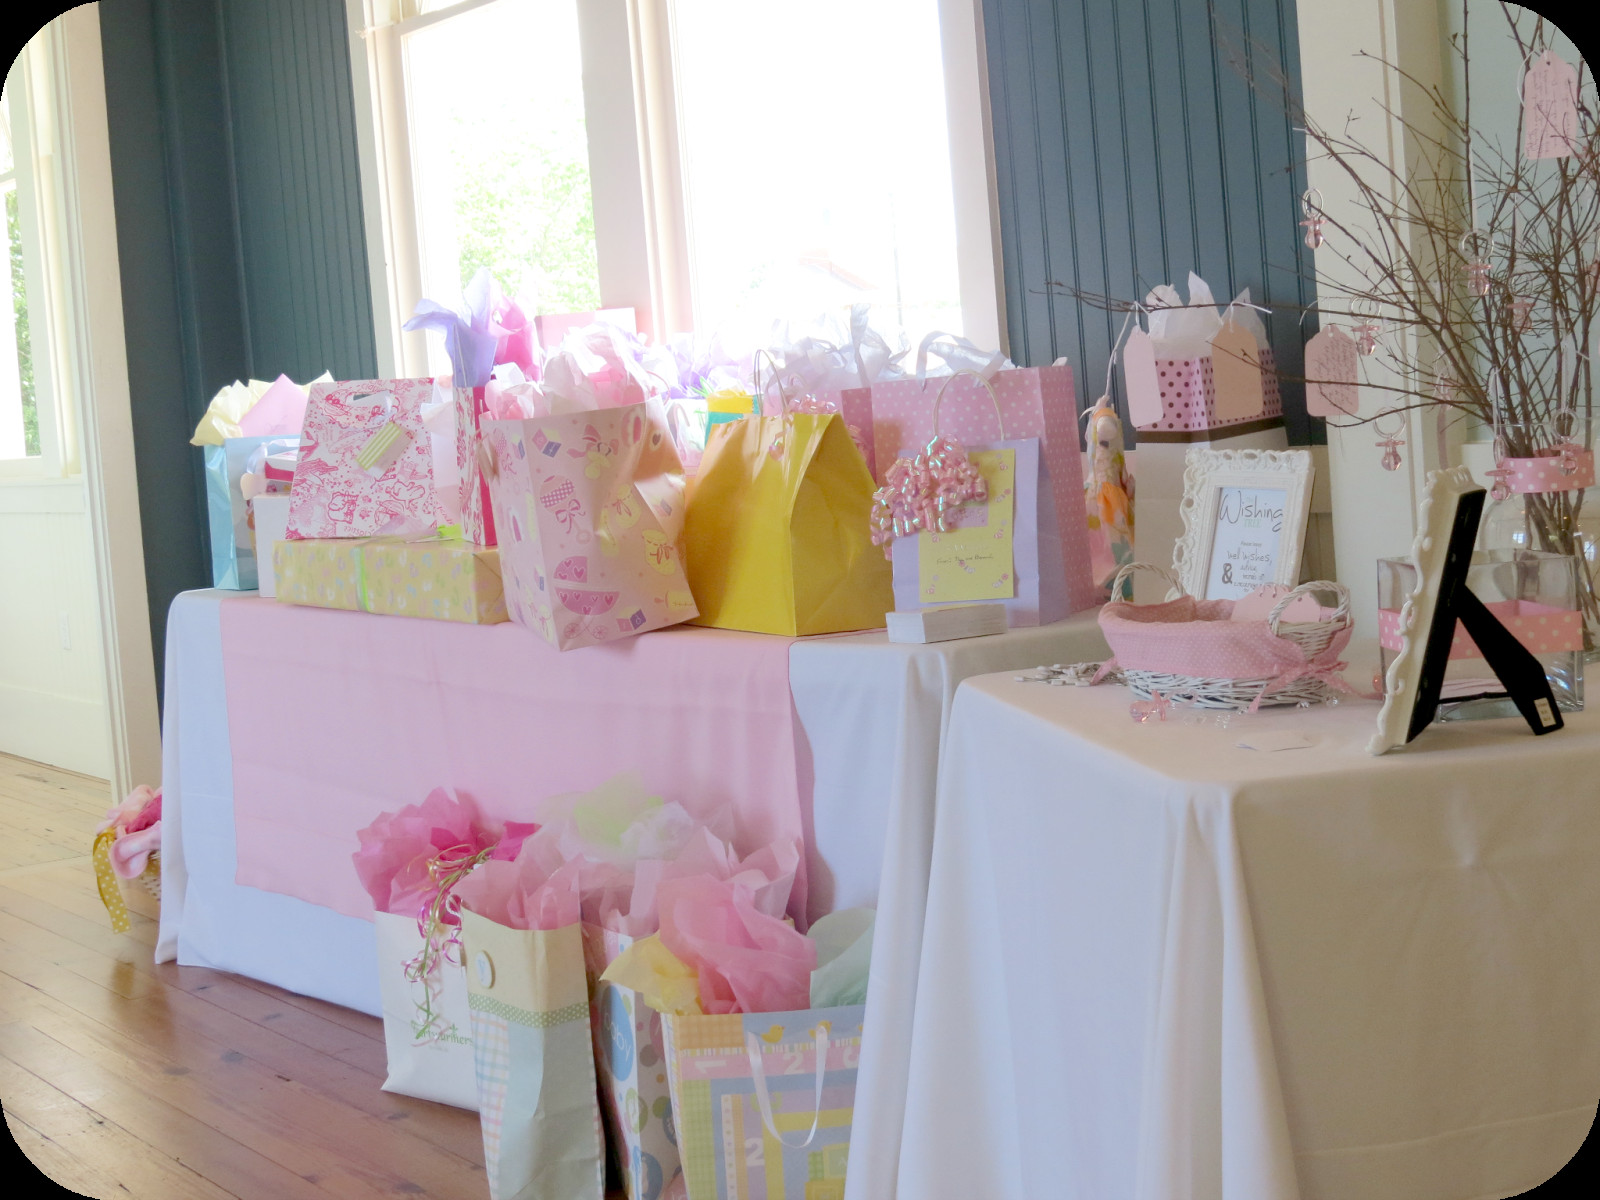 Decorating Ideas For Baby Shower Gift Table
 Sweet Beginnings Baby Shower